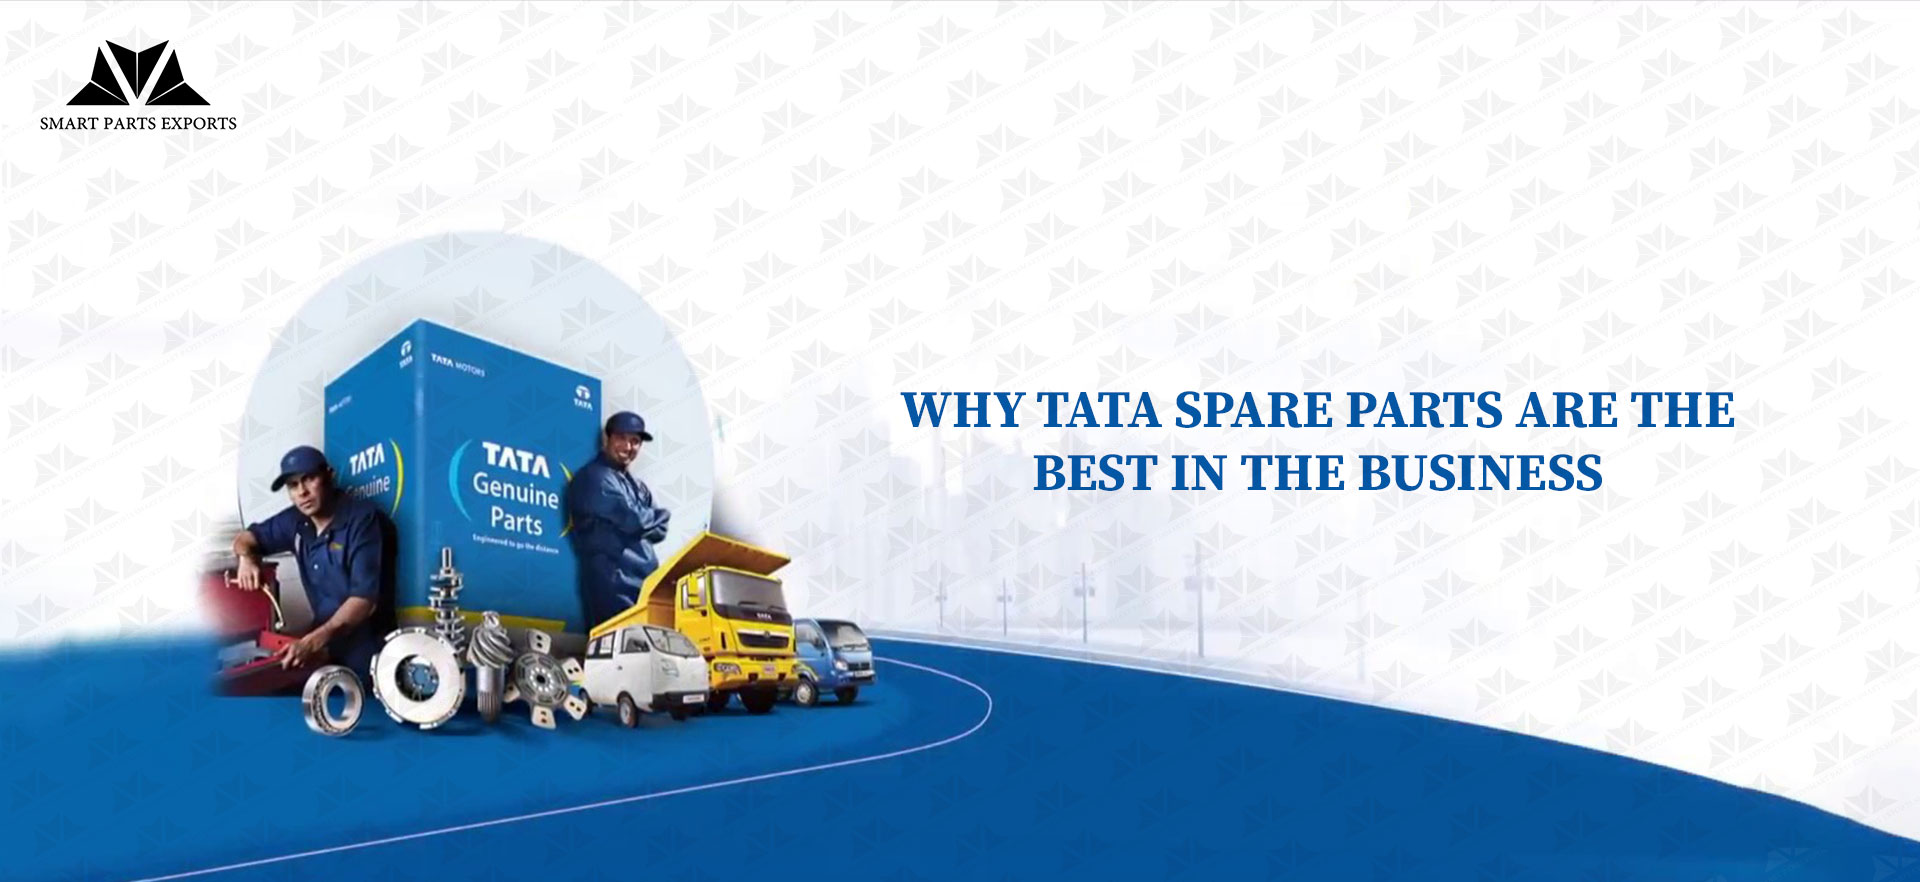 Why Tata Spare Parts are the Best in the Business